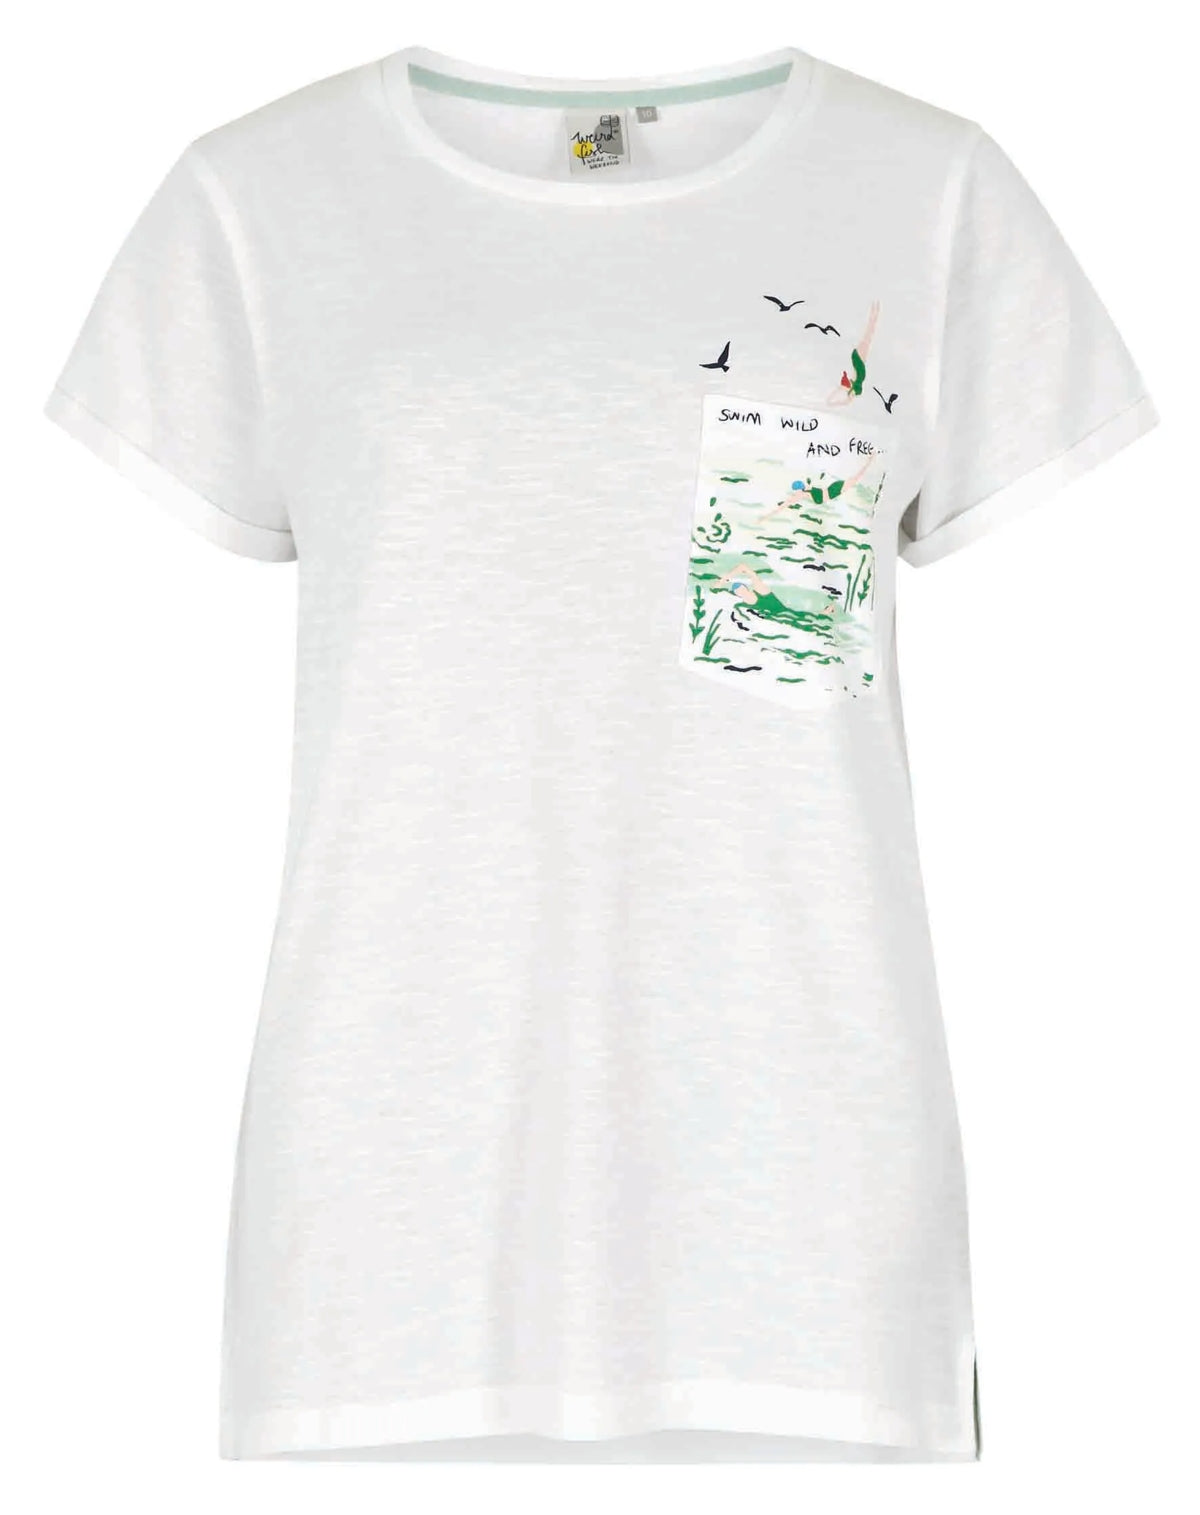 Women's Wild Swimmmers t-shirt from Weird Fish in white with swimmer print diving into the pocket.